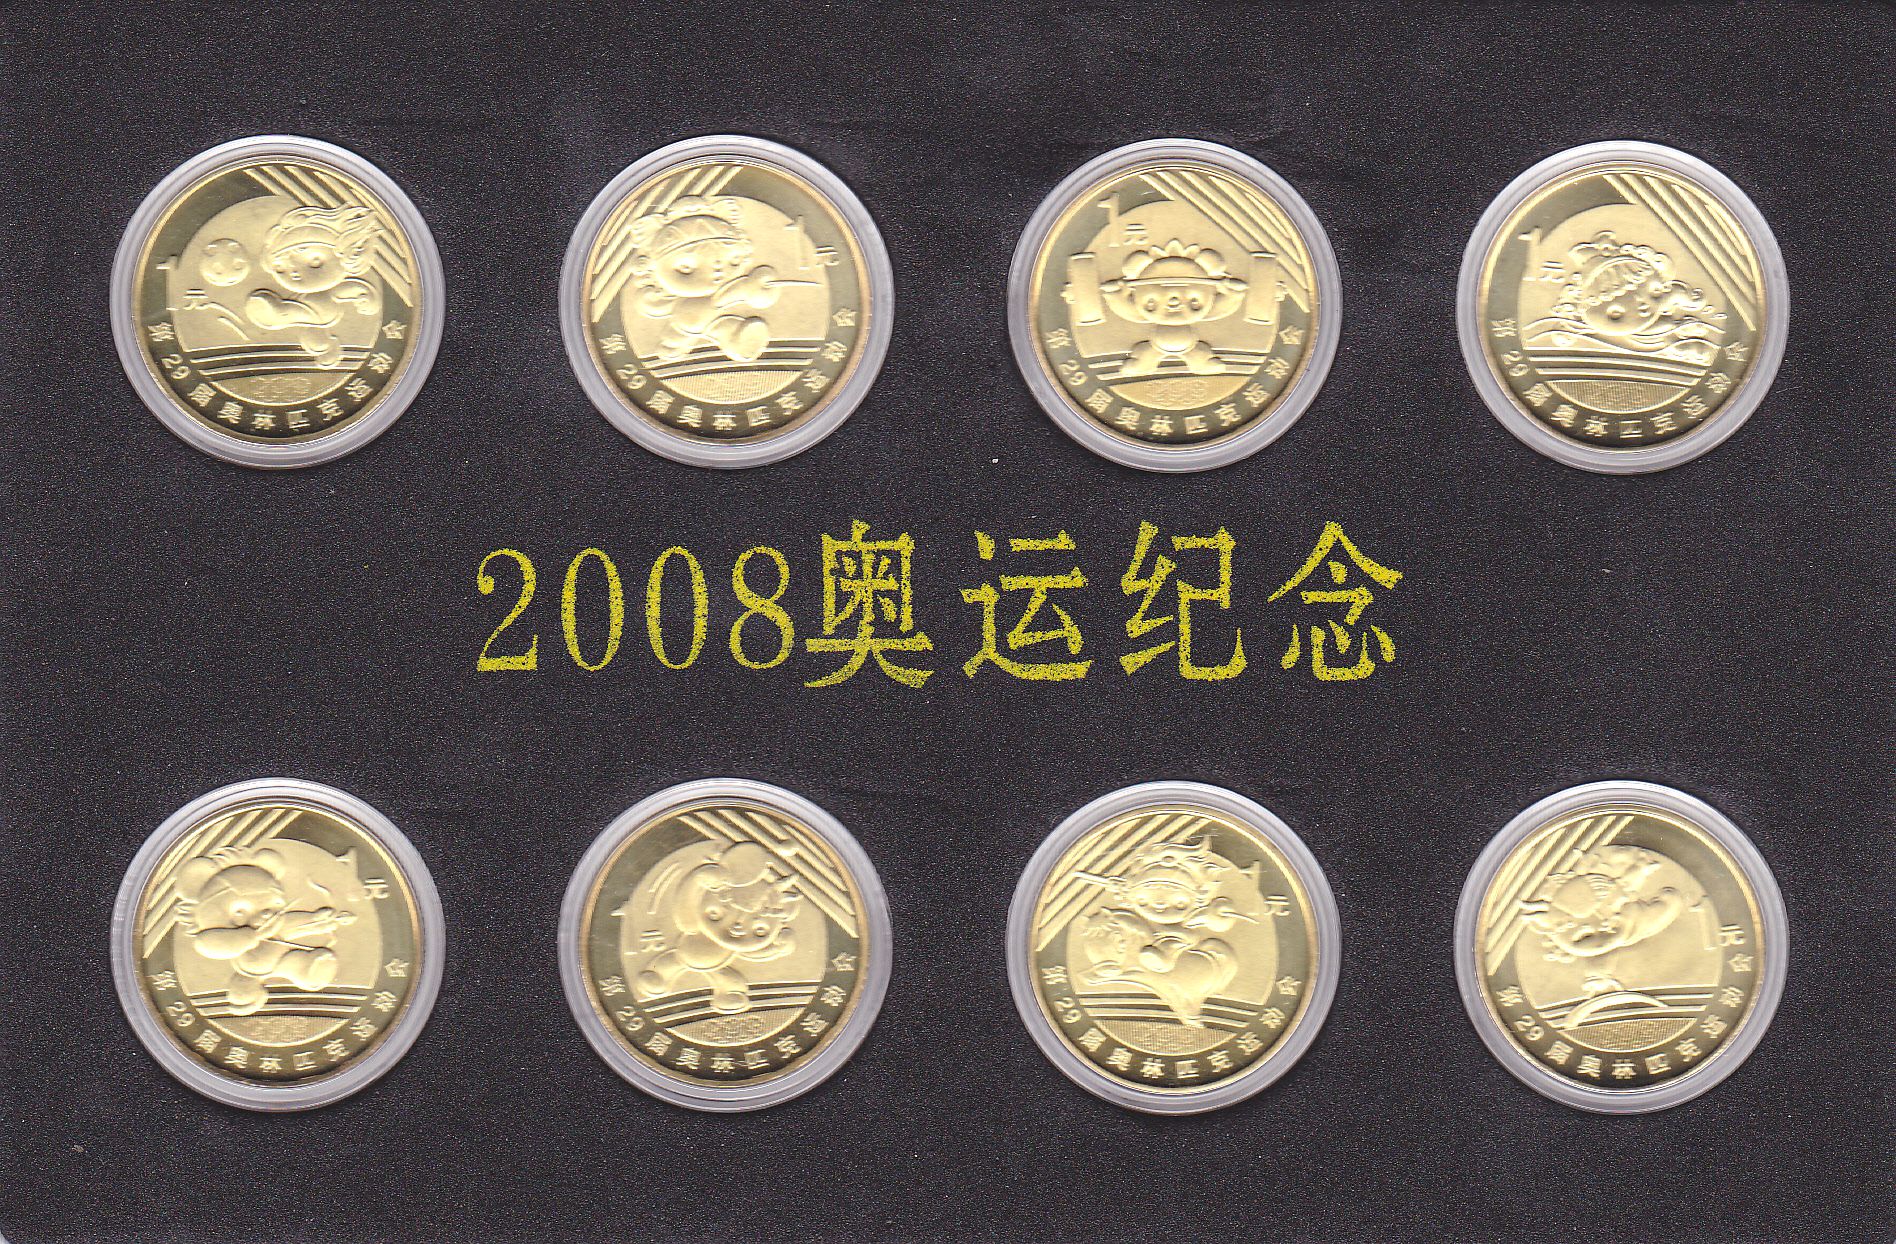 K7556, China Beijing 29th Olympic Games, 8 pcs Coins, 2008